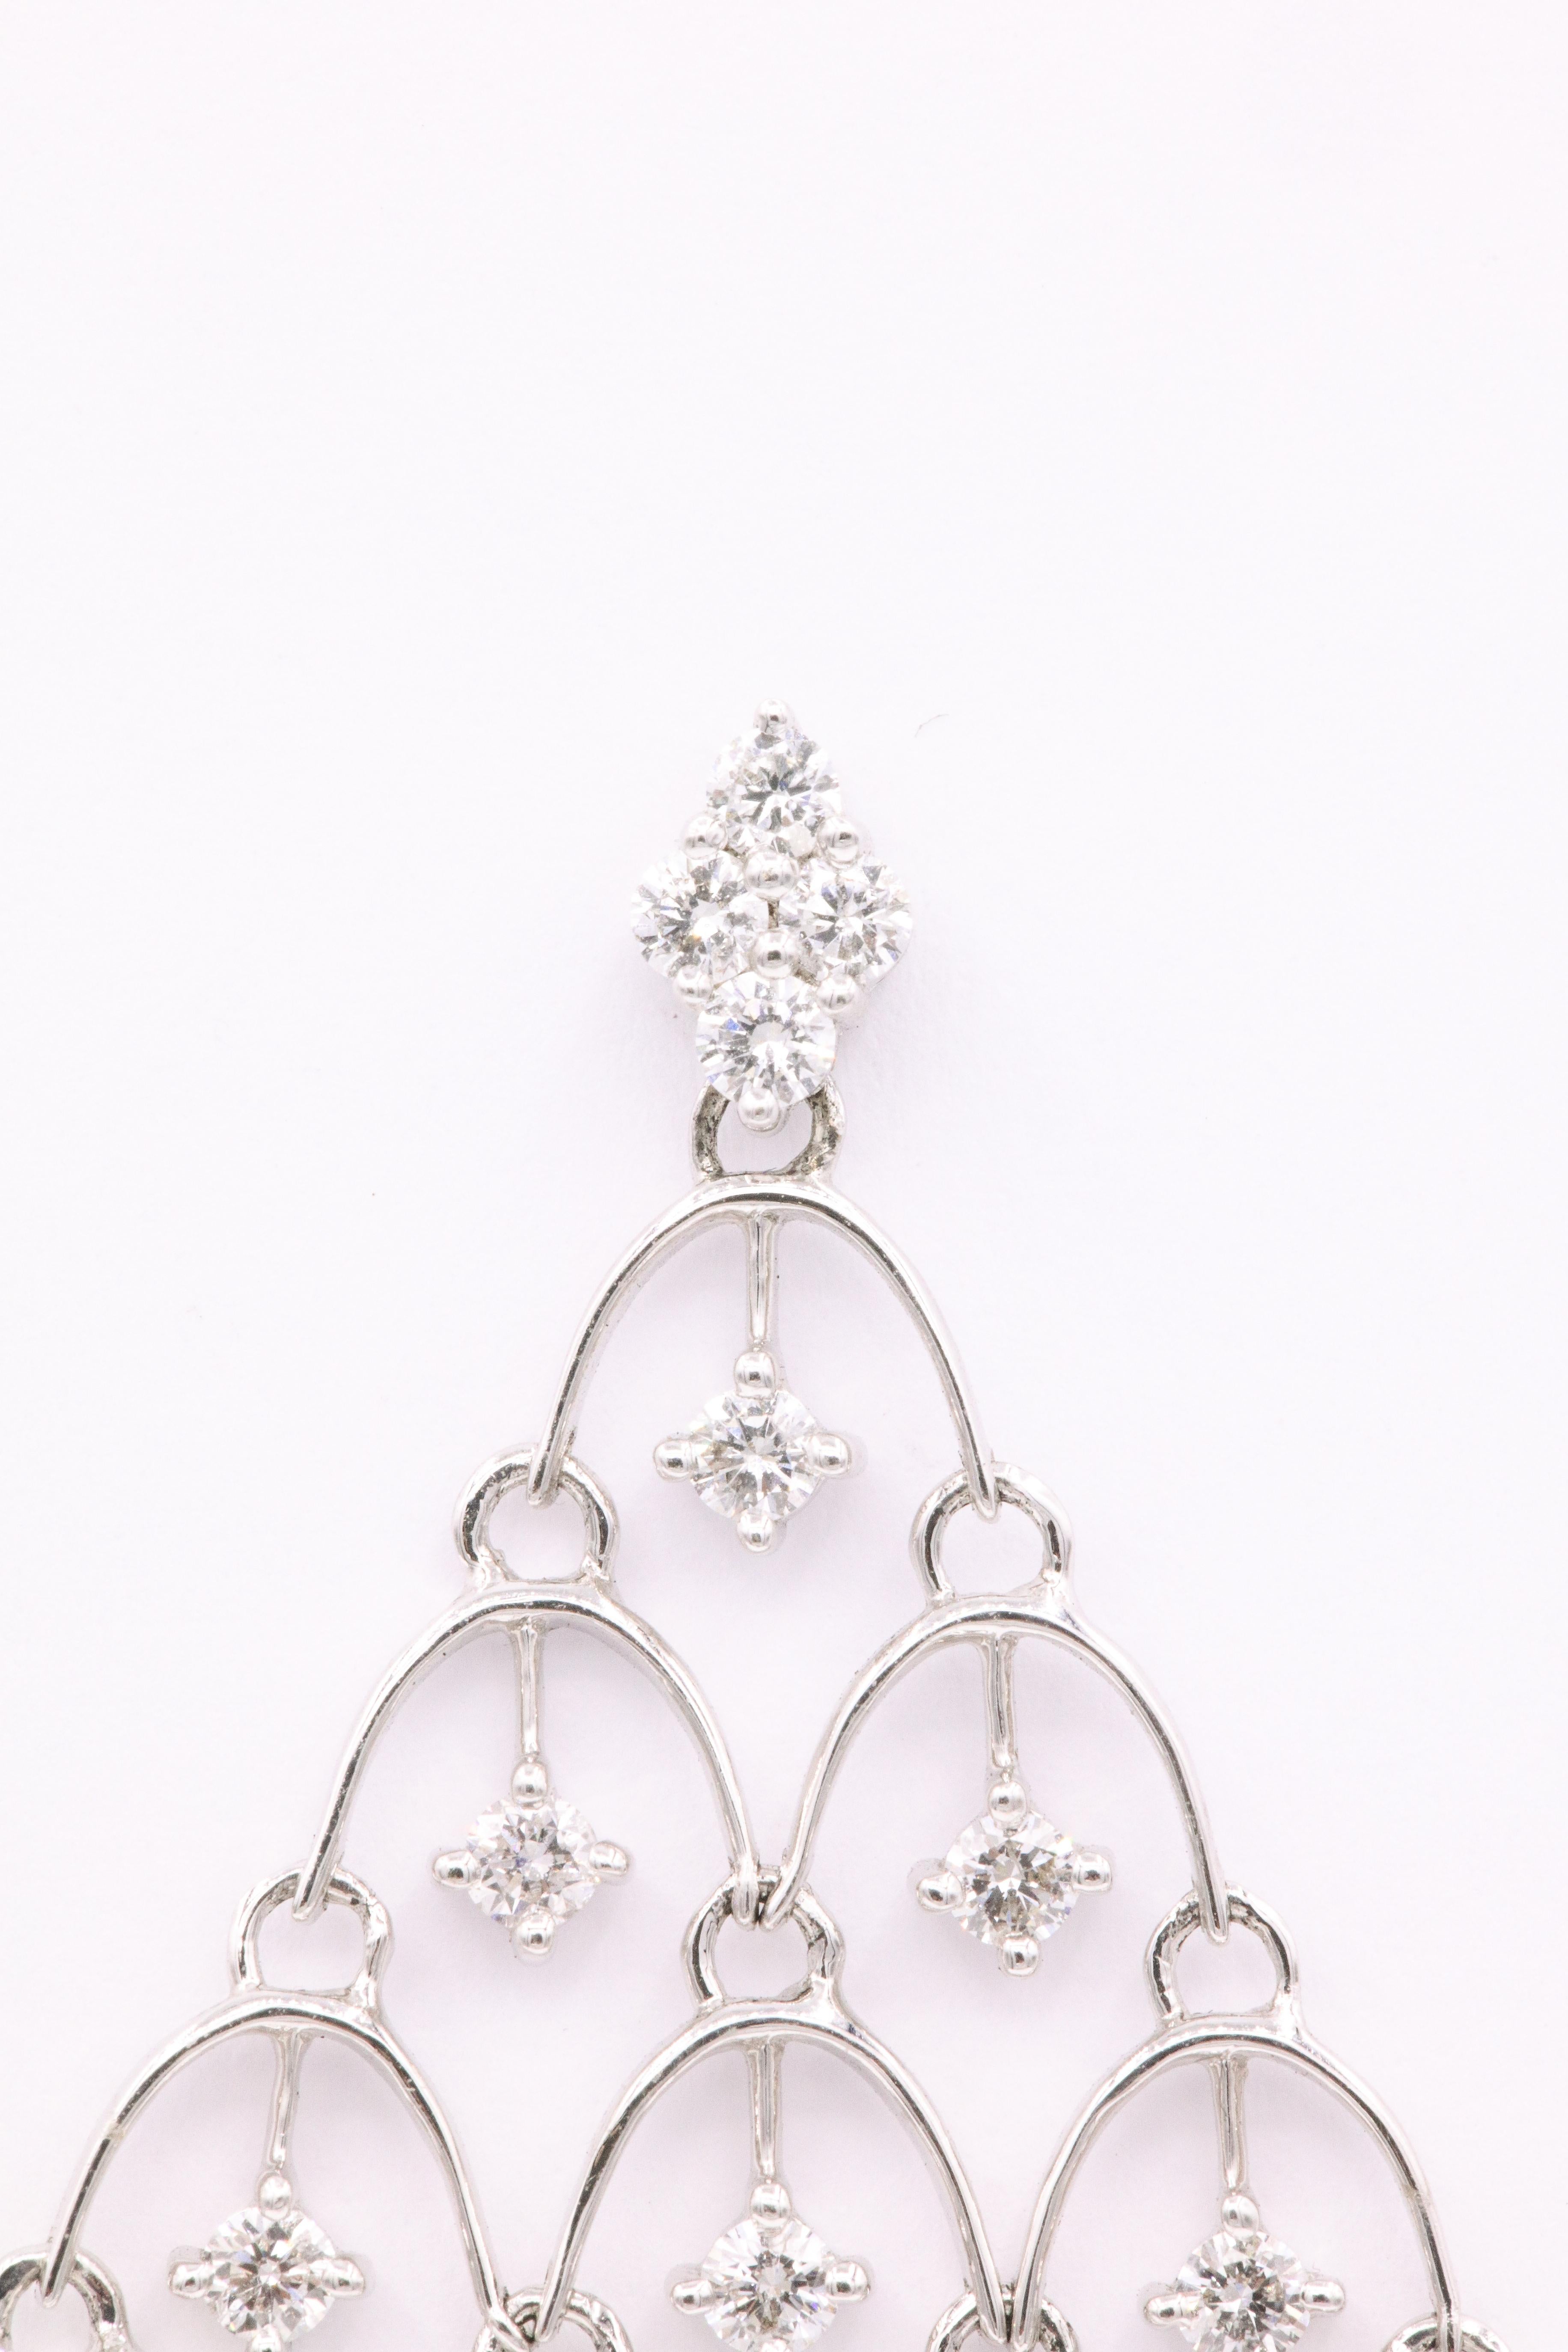 Diamond Mesh Drop Earrings 2.17 Carats 18 Karat White Gold In New Condition For Sale In New York, NY